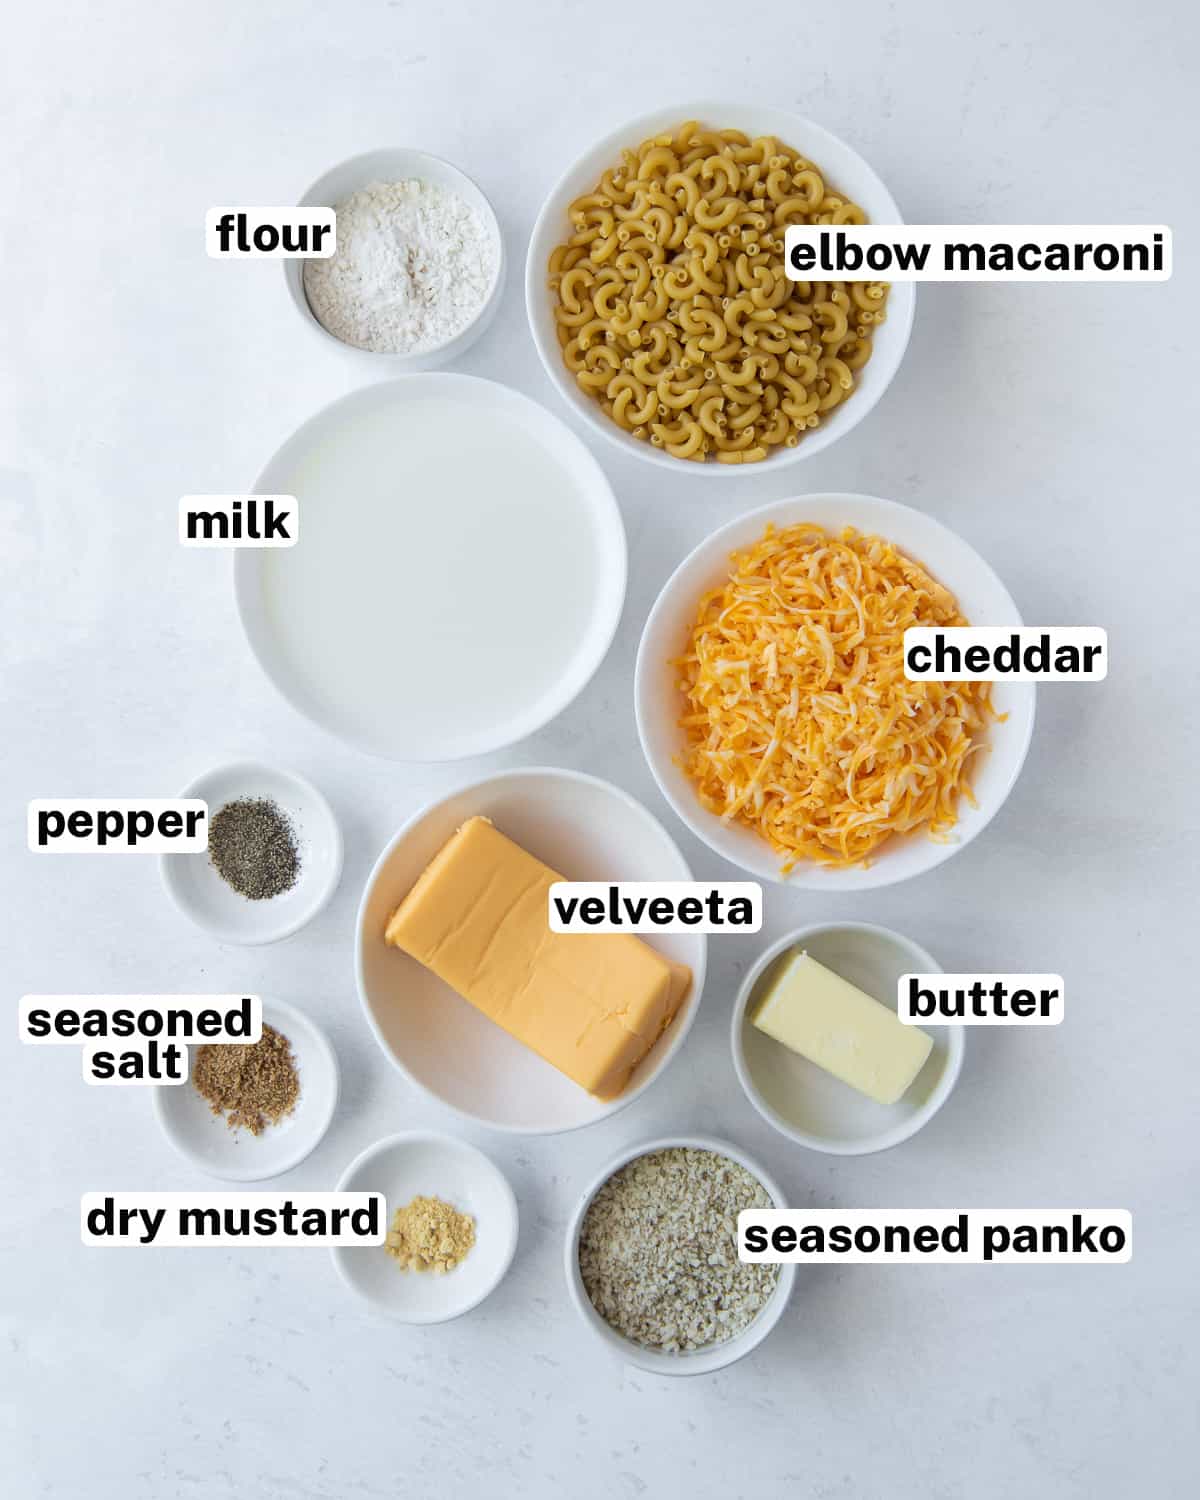 The ingredients for Macaroni and Cheese with text.